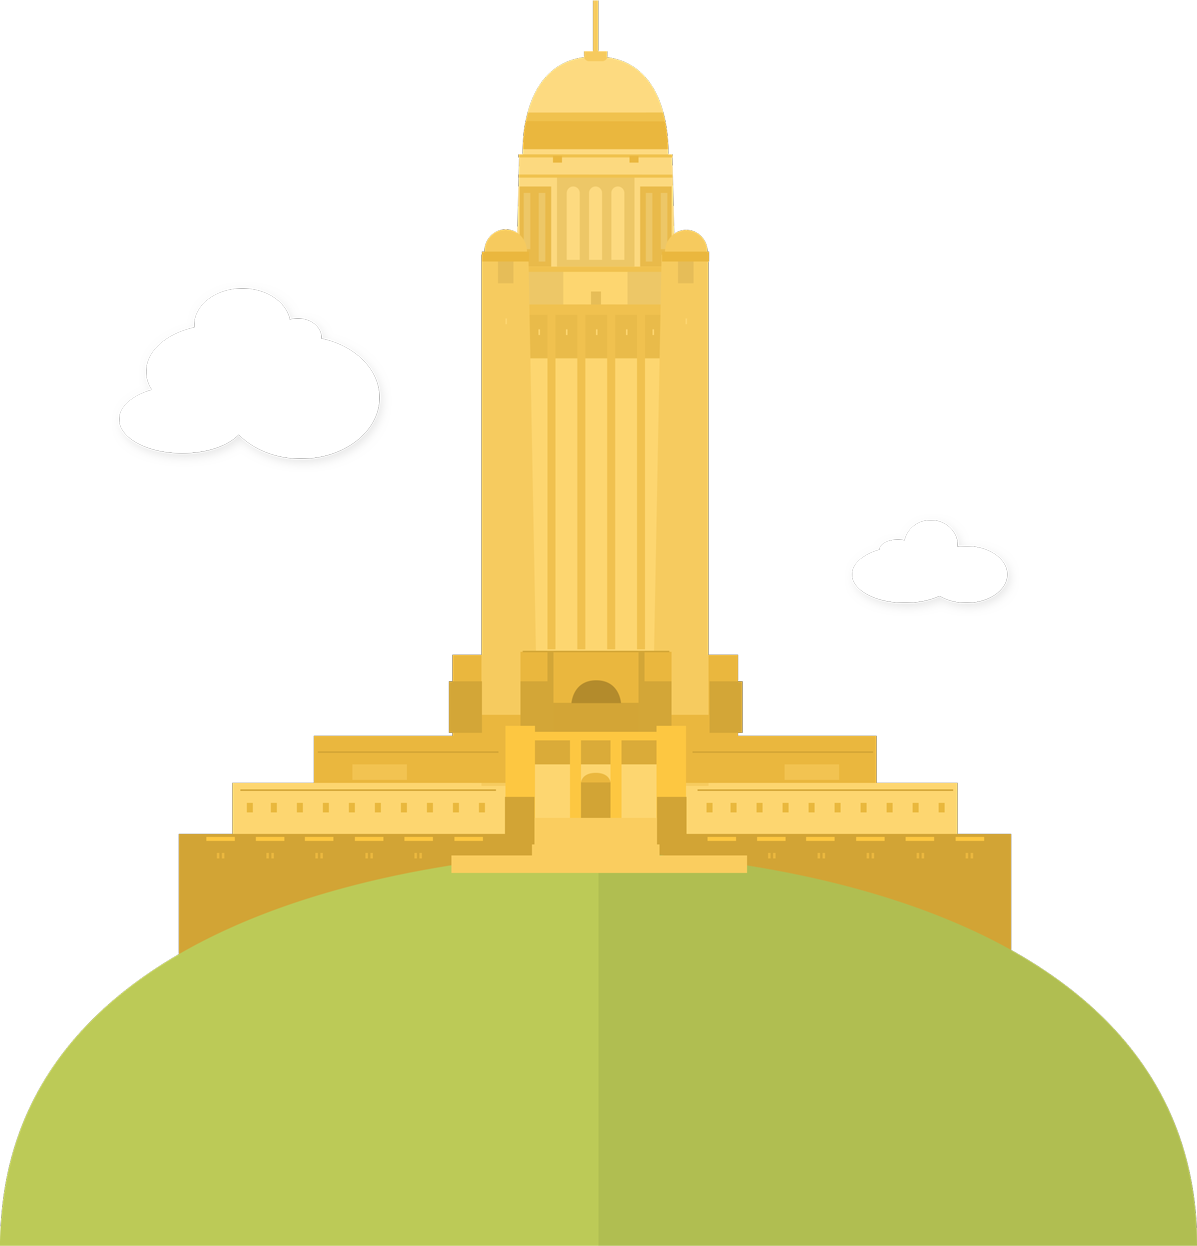 The majestic Nebraska State Capitol sits atop a grassy hill signifying our great partnership with the state.